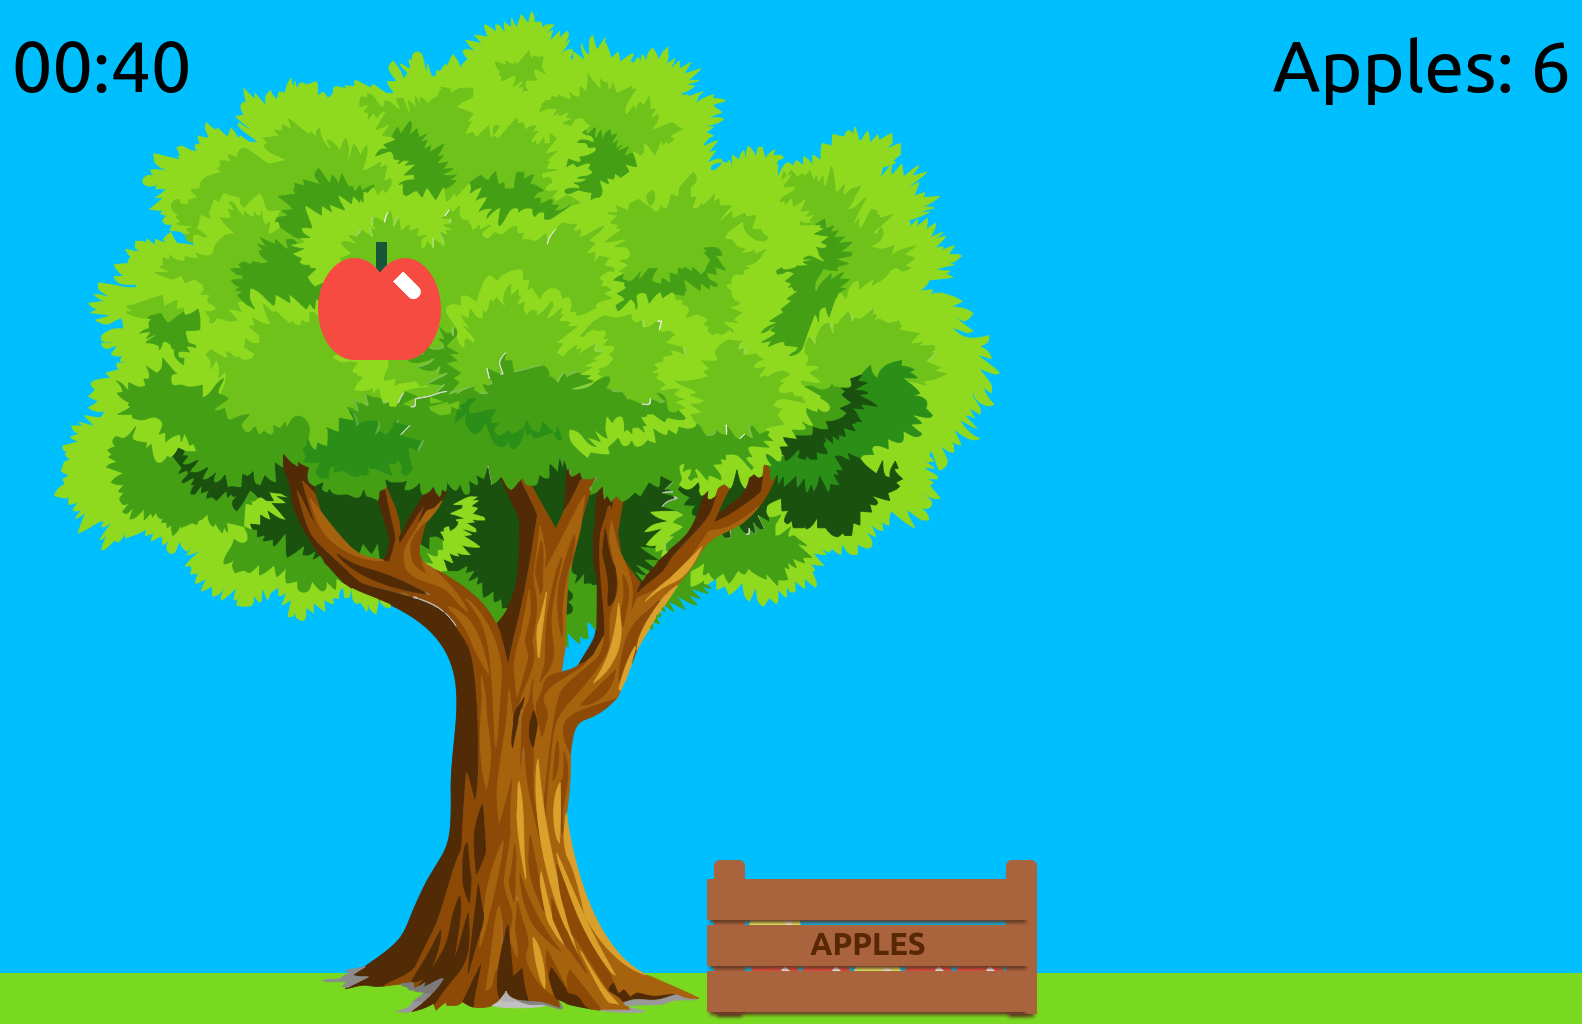 Screenshot of a game with a tree containing a red apple. The base of the tree has a partially filled crate labeled "apples".